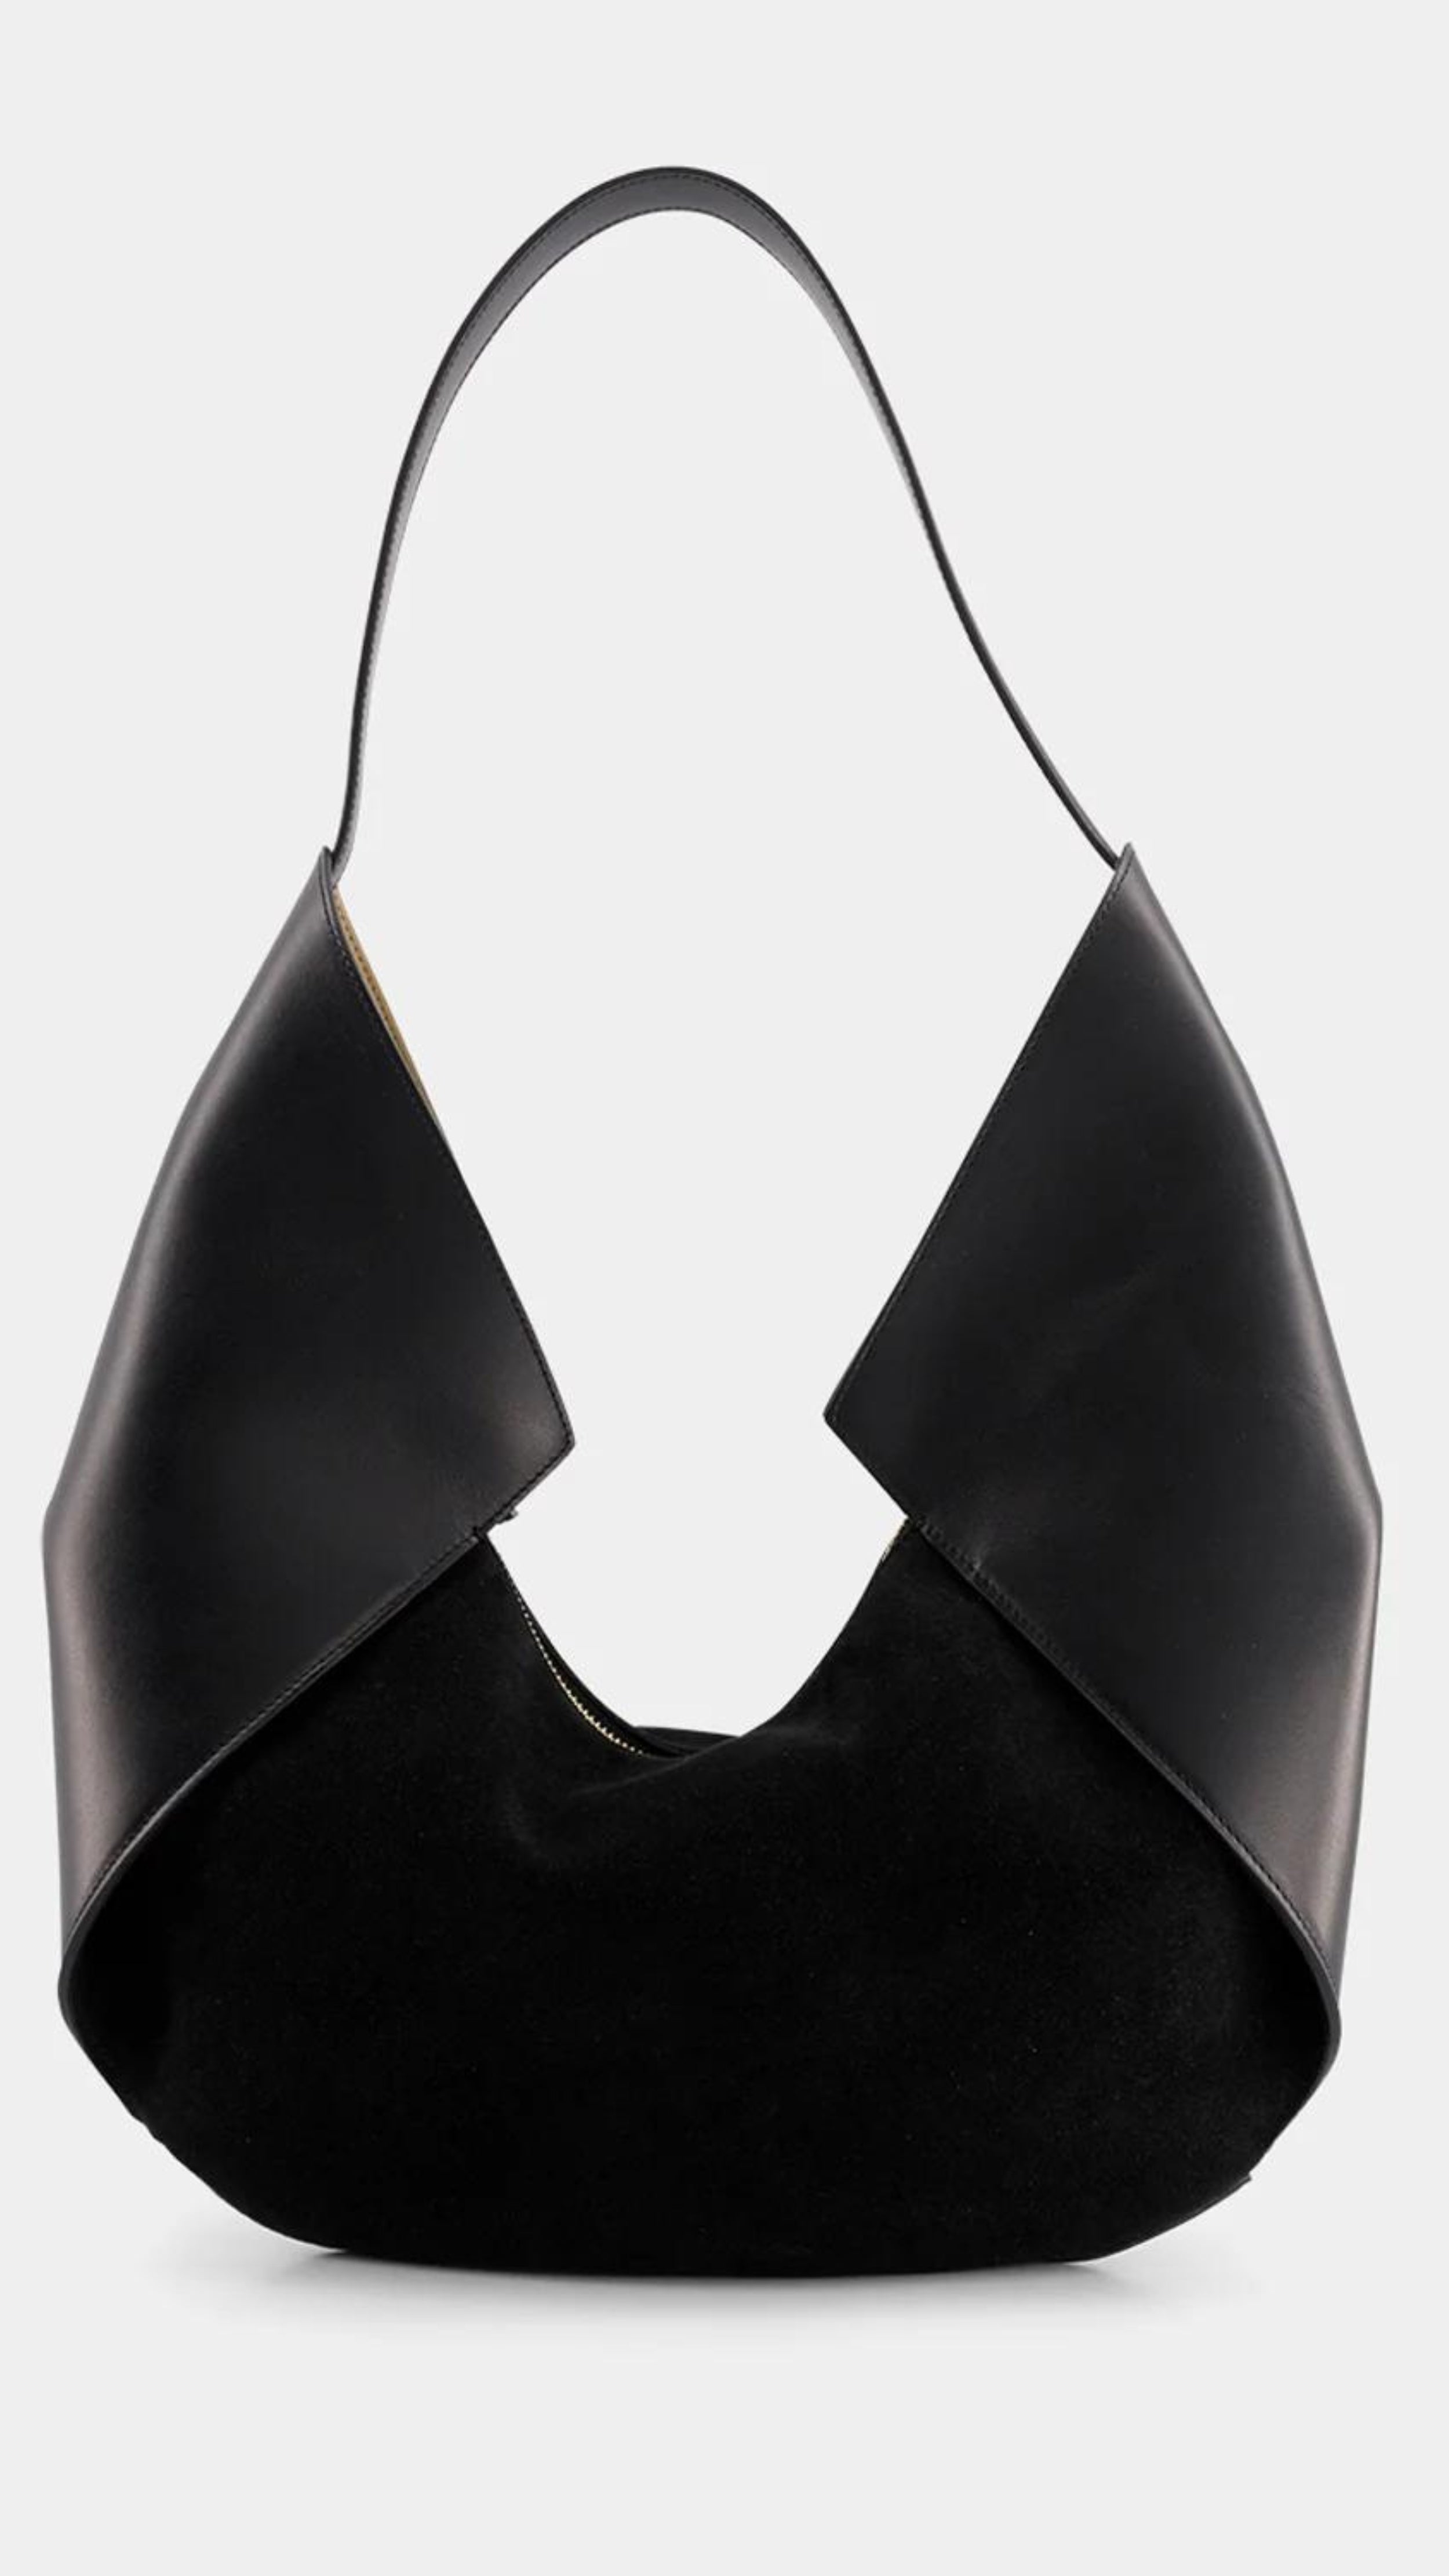 Ree Projects Riva Mini in Soft Calf and Suede in Black. Modern shaped soft black leather and suede purse. Small sized should bag with a zipper closure. Product photo from the front view.